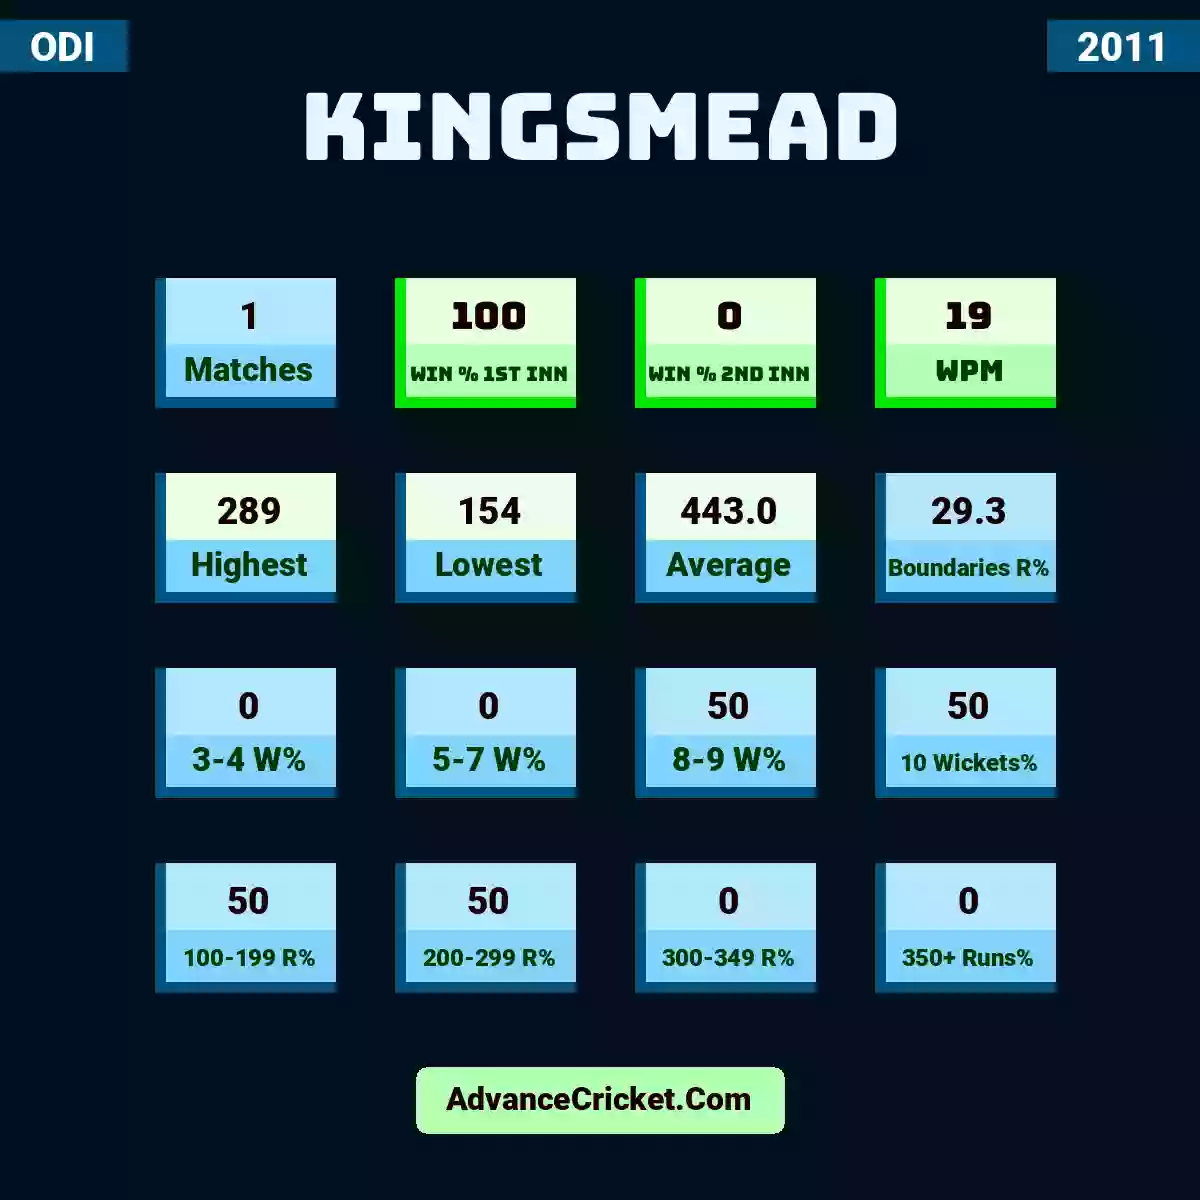 Image showing Kingsmead with Matches: 1, Win % 1st Inn: 100, Win % 2nd Inn: 0, WPM: 19, Highest: 289, Lowest: 154, Average: 443.0, Boundaries R%: 29.3, 3-4 W%: 0, 5-7 W%: 0, 8-9 W%: 50, 10 Wickets%: 50, 100-199 R%: 50, 200-299 R%: 50, 300-349 R%: 0, 350+ Runs%: 0.